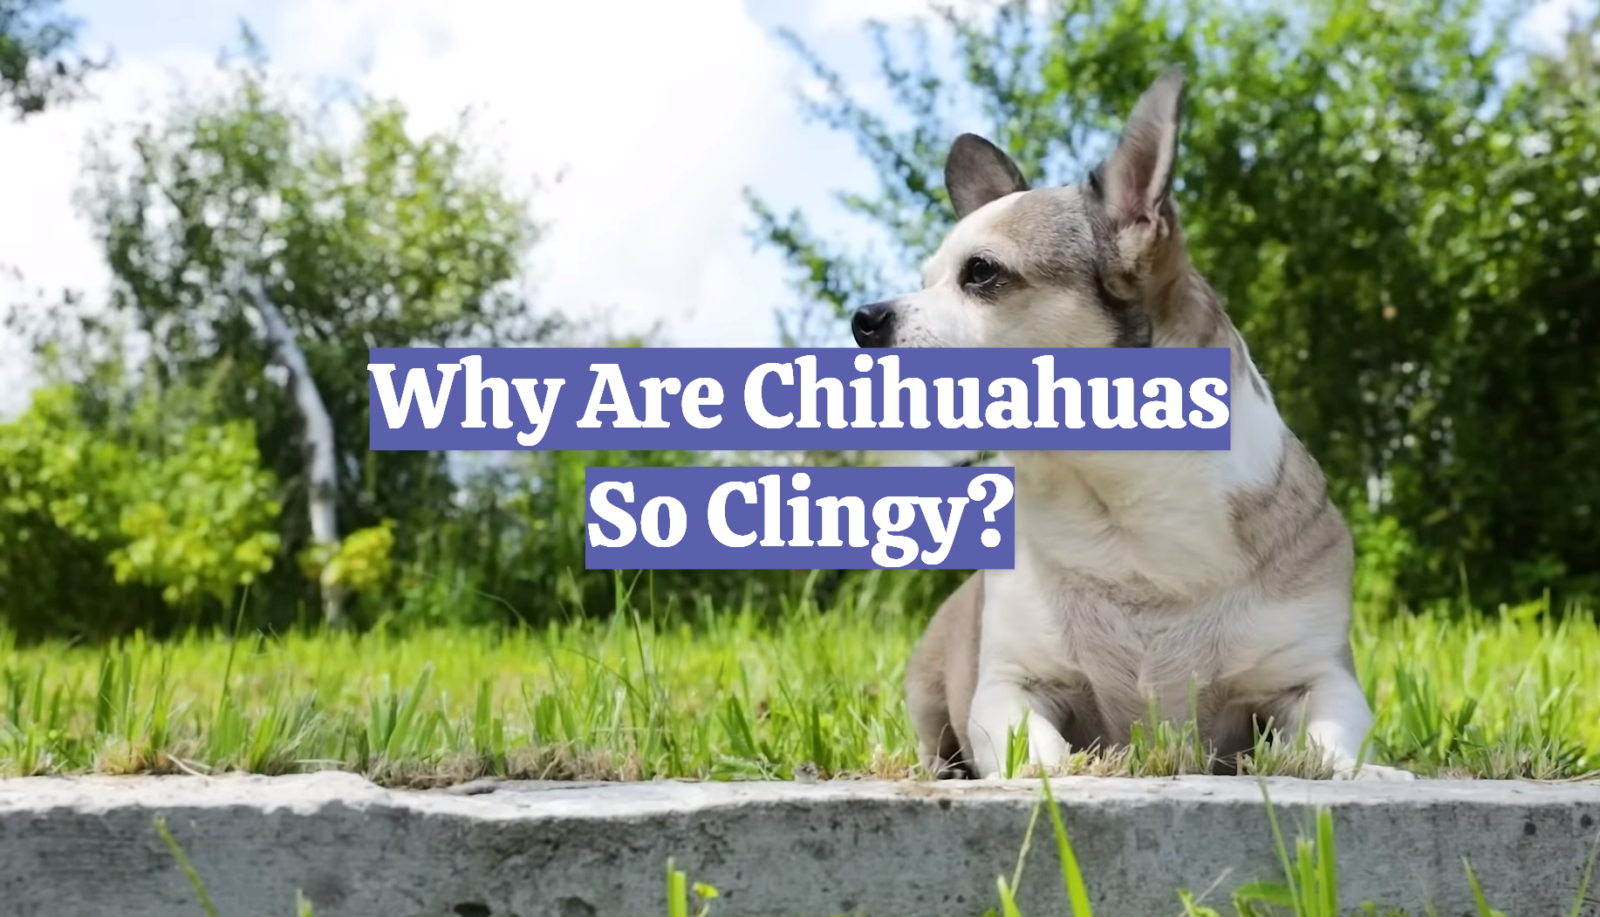 Why Are Chihuahuas So Clingy?